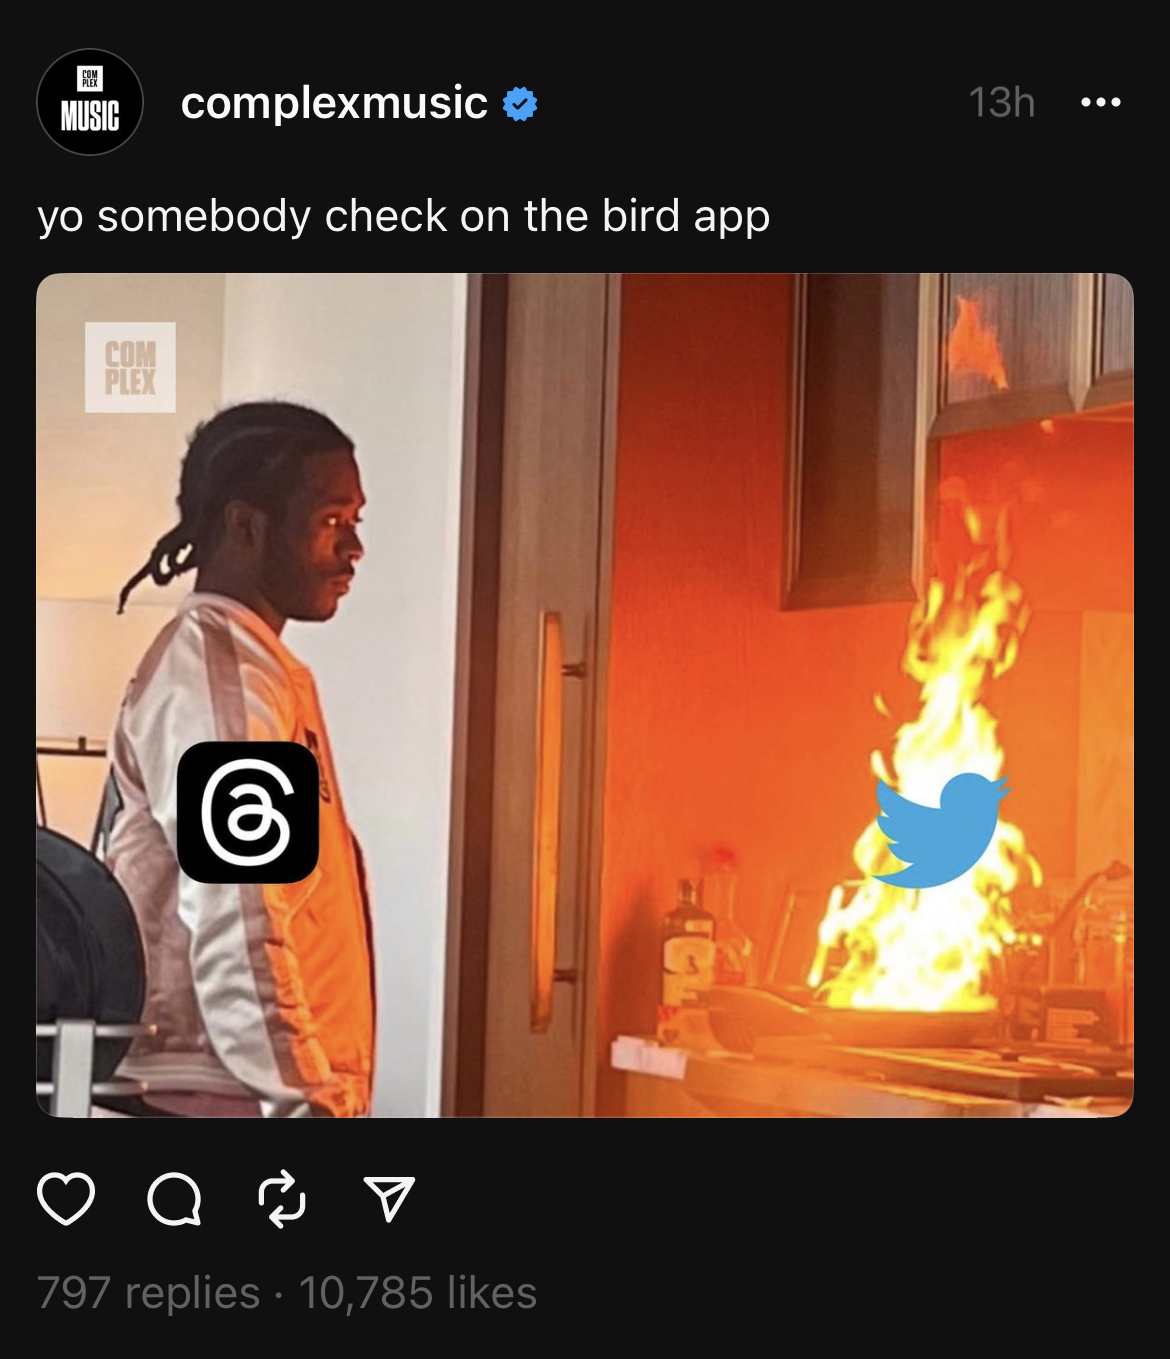 A thread of Lil Uzi Vert watching his pan on fire with the Twitter logo superimposed over the flame